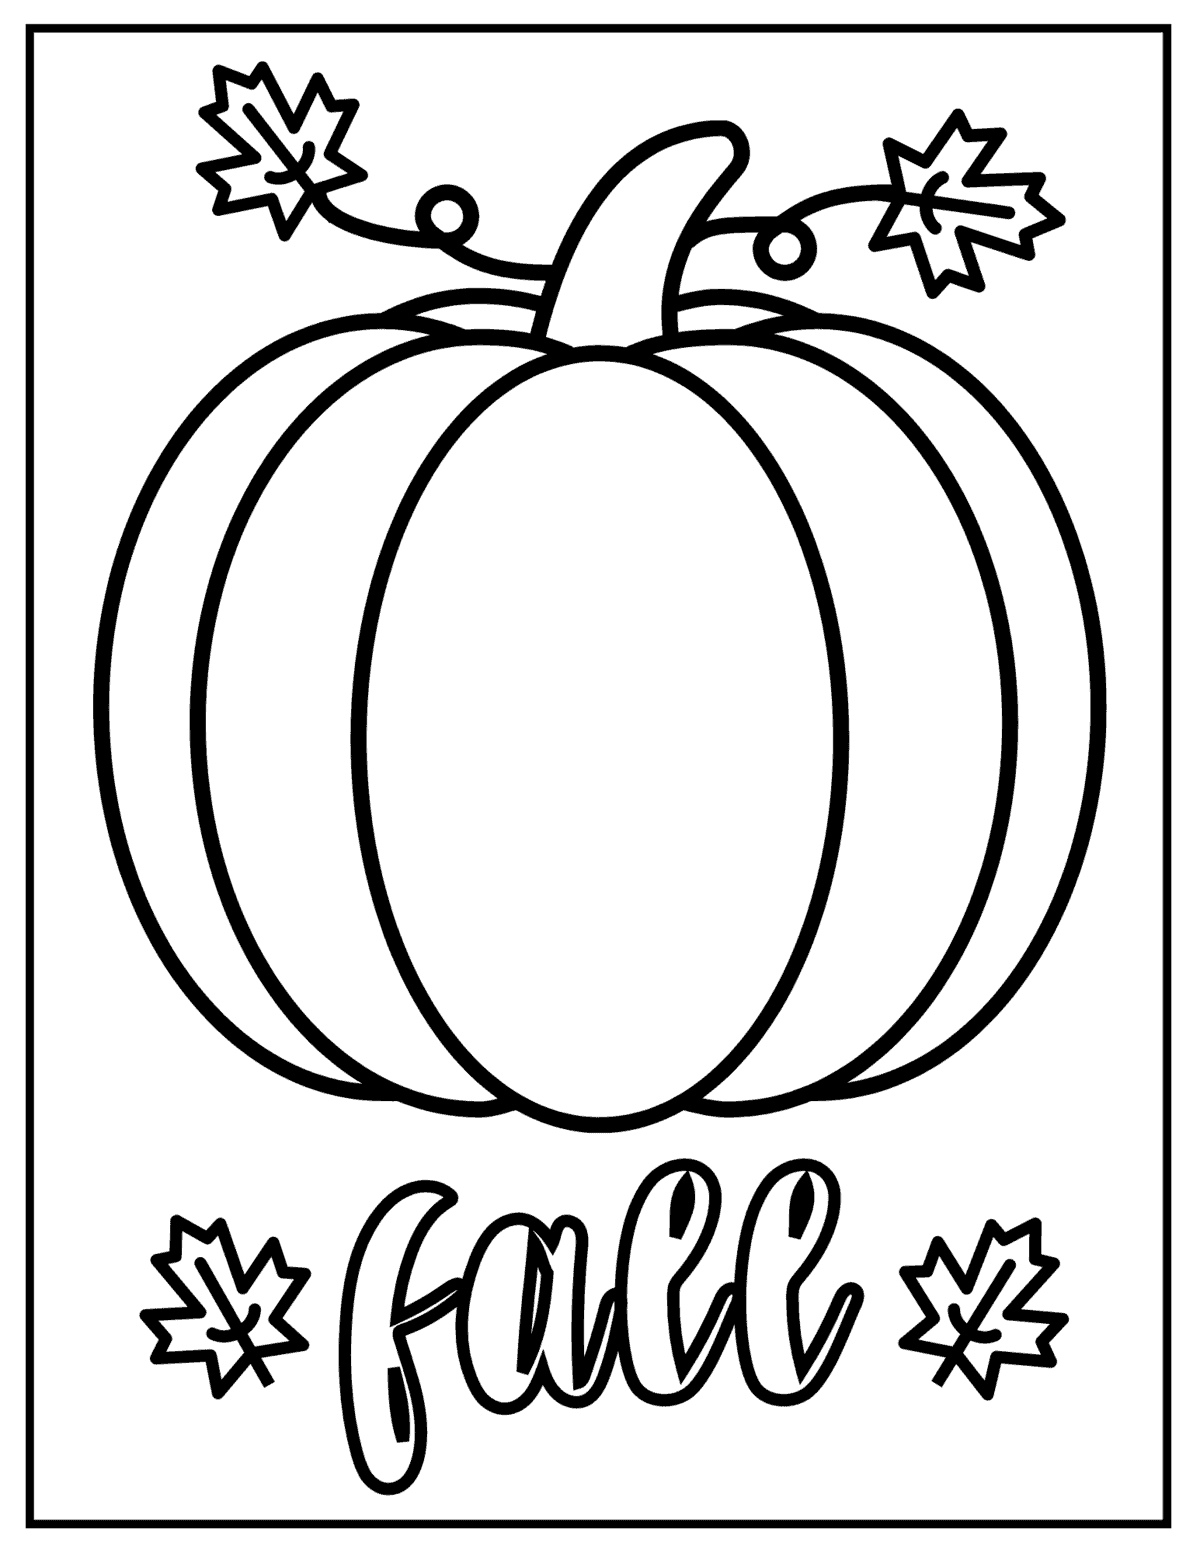 Free printable fall coloring pages